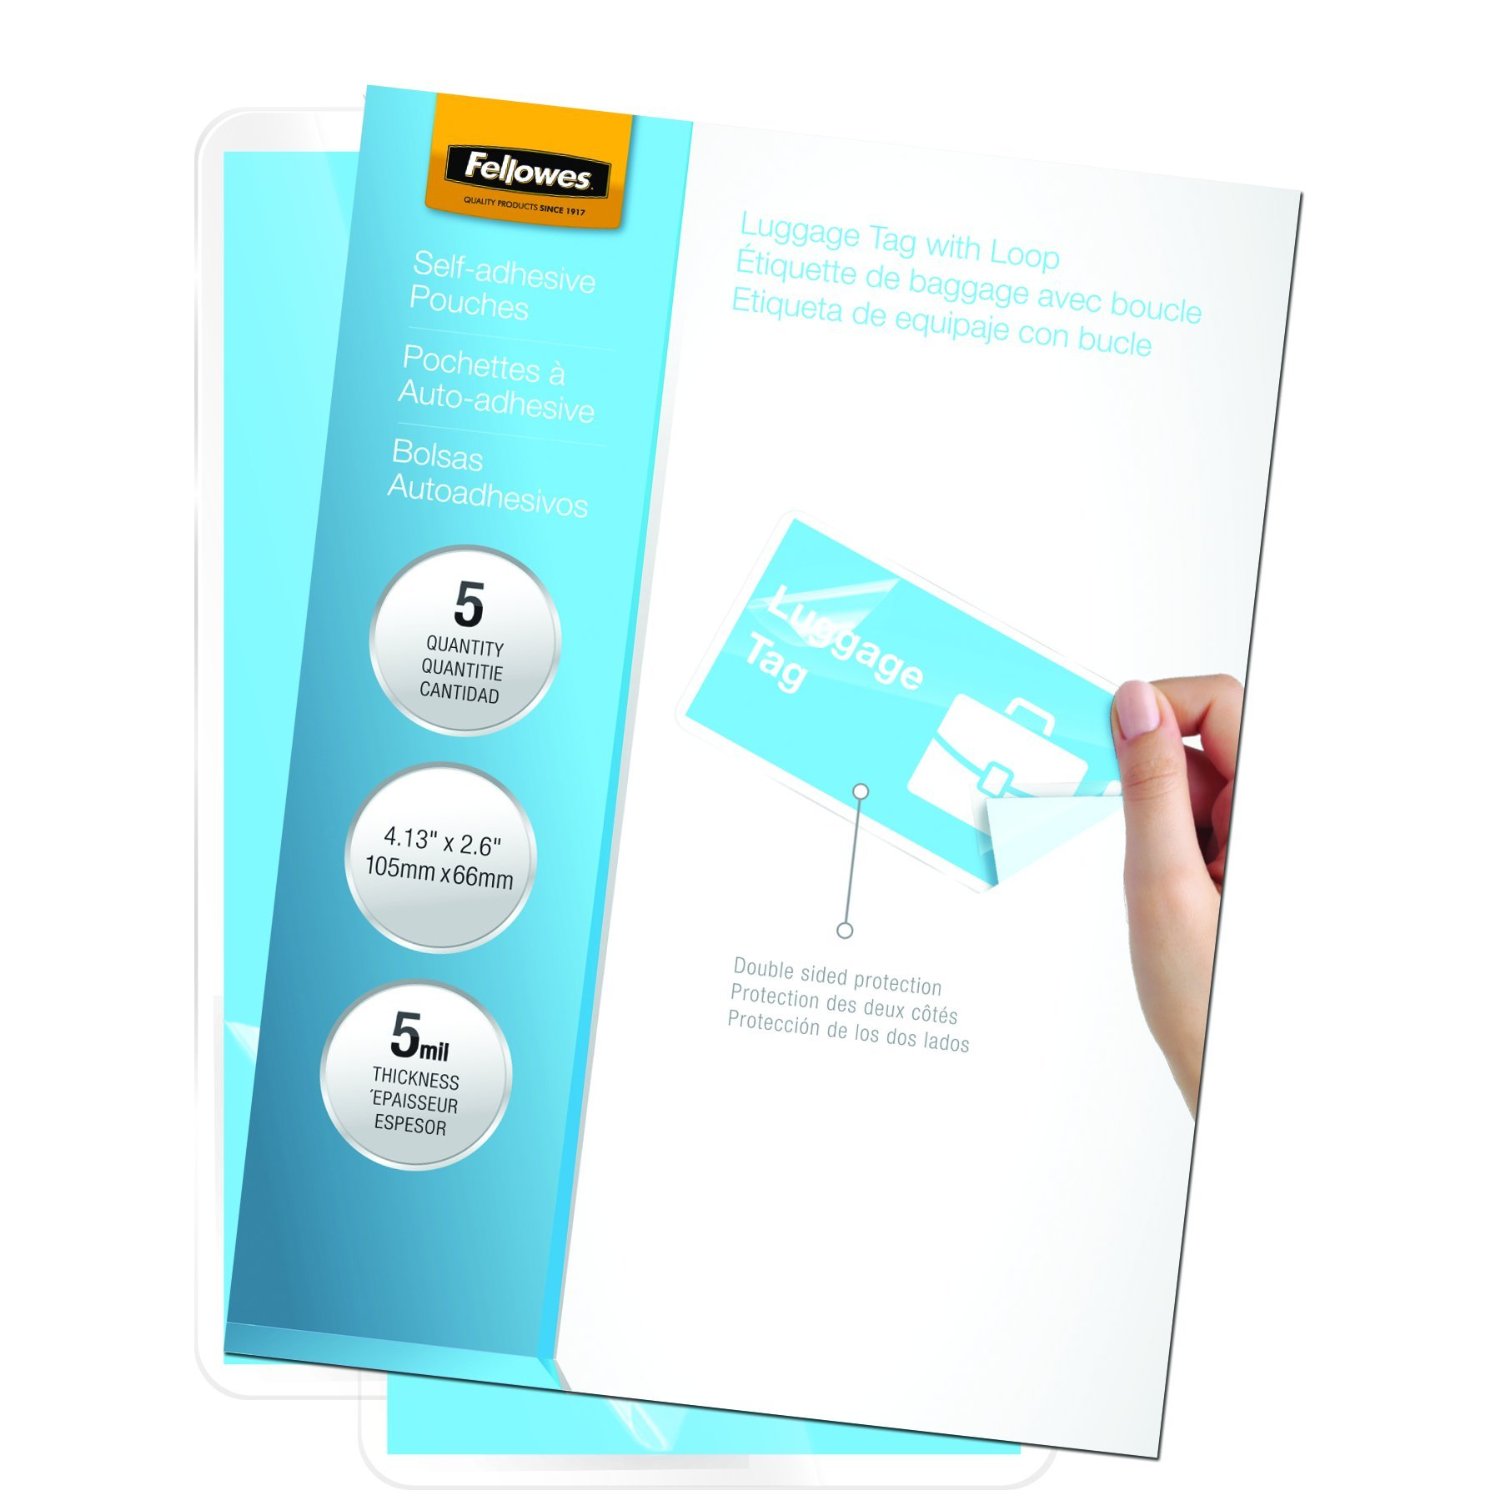 How to Use Fellowes Self-Adhesive Business Card Pouches 